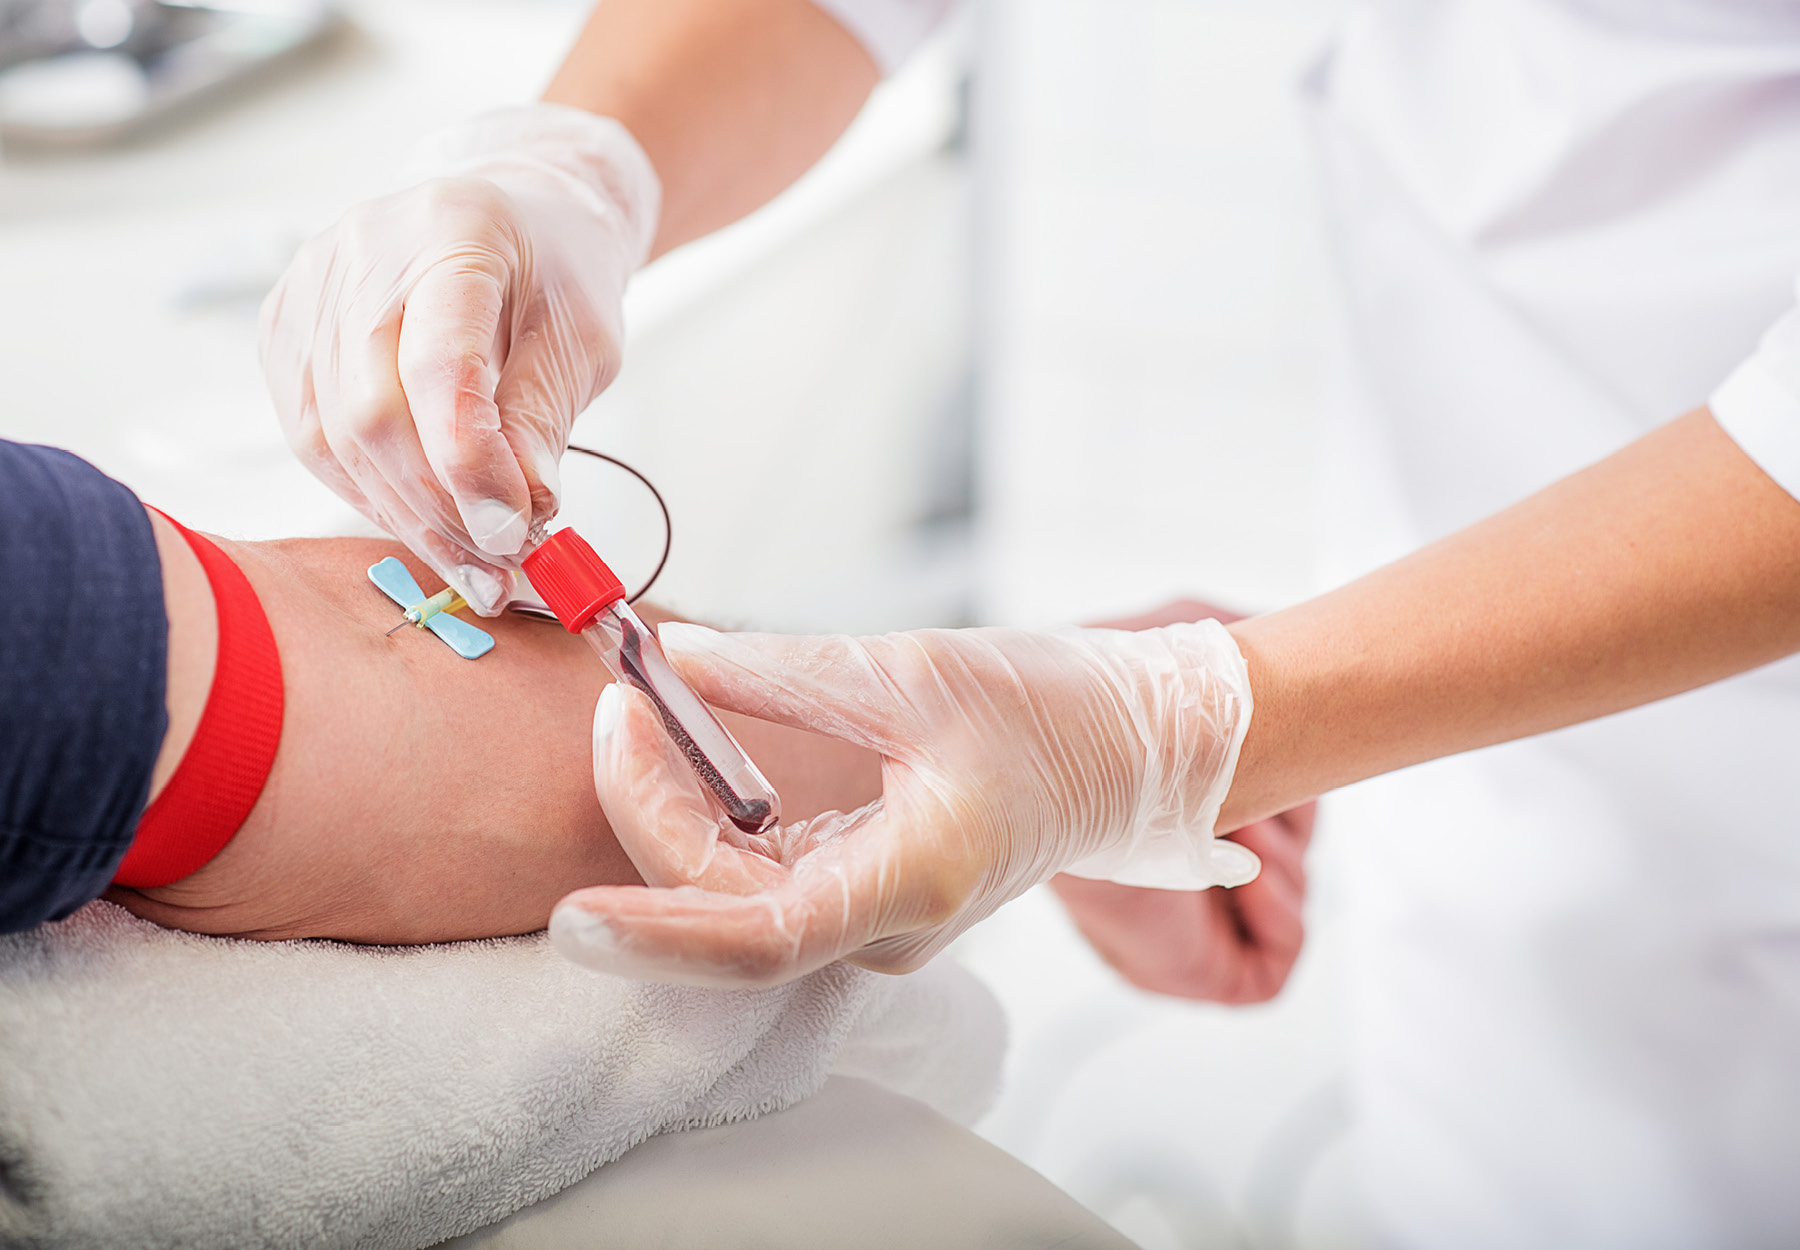 A closeup of a nurse taking a blood sample from a patient's arm.